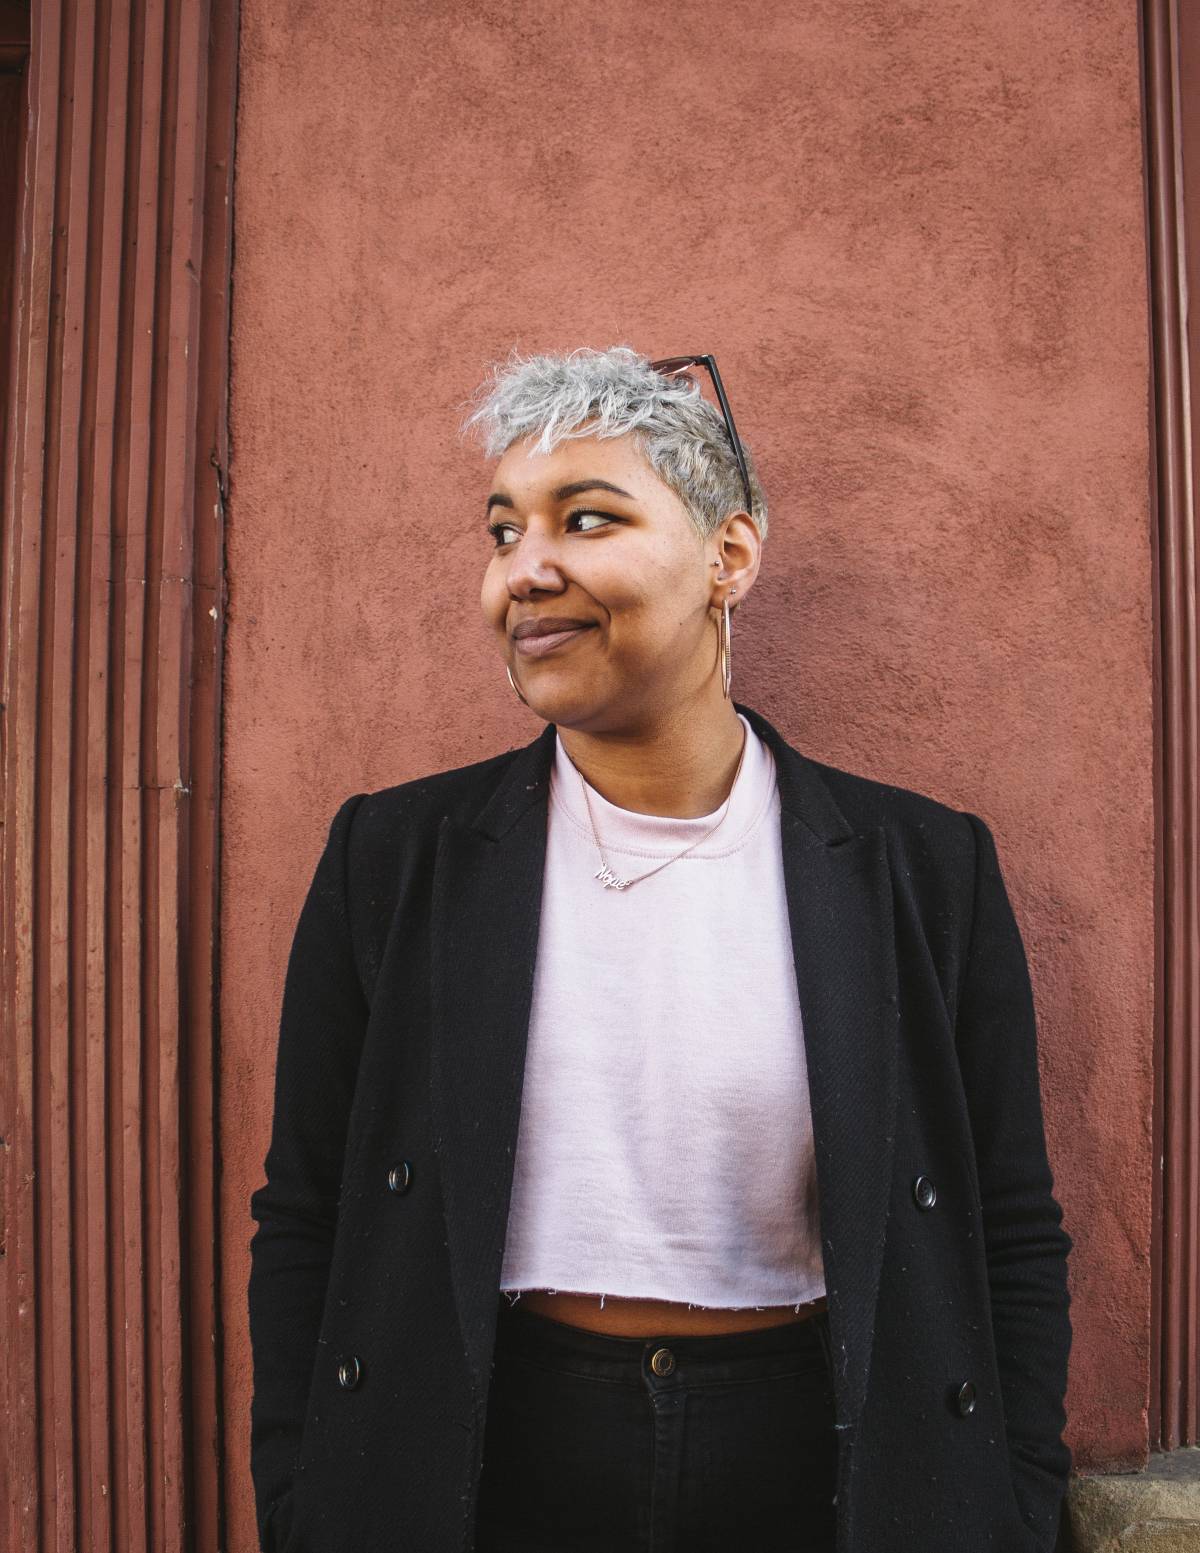 Koko has short silver hair and is wearing a white cropped top underneath a black blazer. She is standing against a dusty pink wall and smiling whilst looking off to the left.